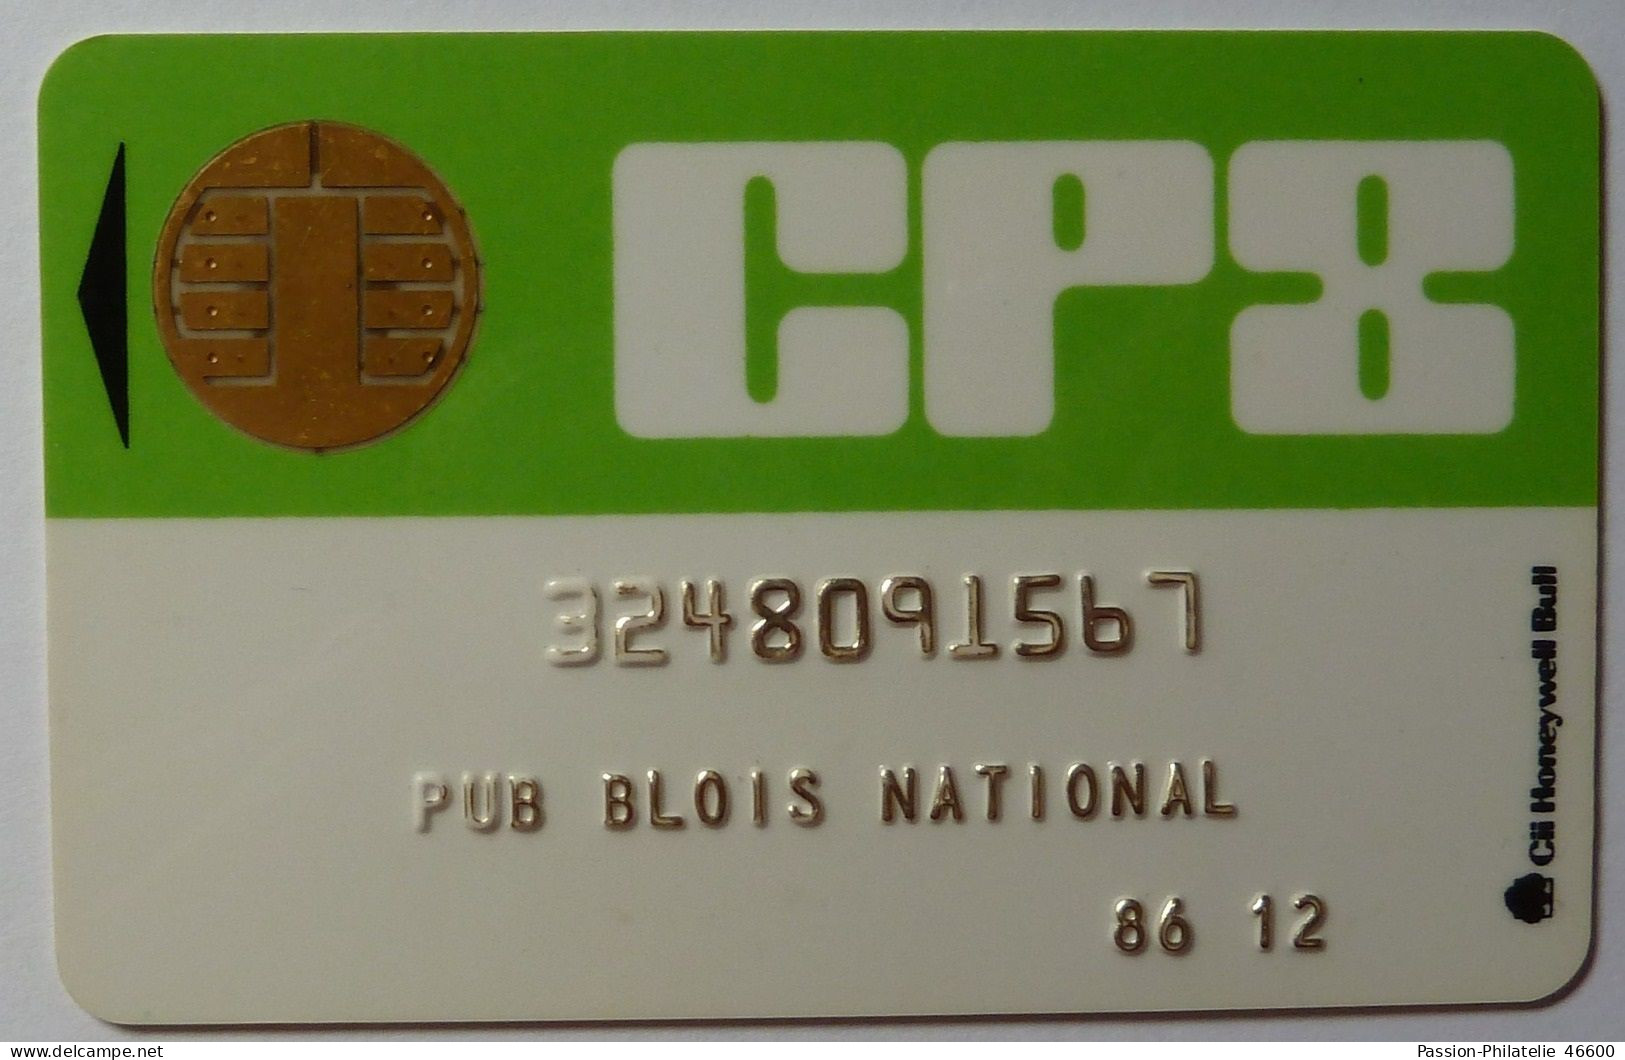 FRANCE - CP8 - PUB BLOIS NATIONAL - Bull 2 Chip - Publiphone Test - Early 1985 - Used - RR - Other & Unclassified